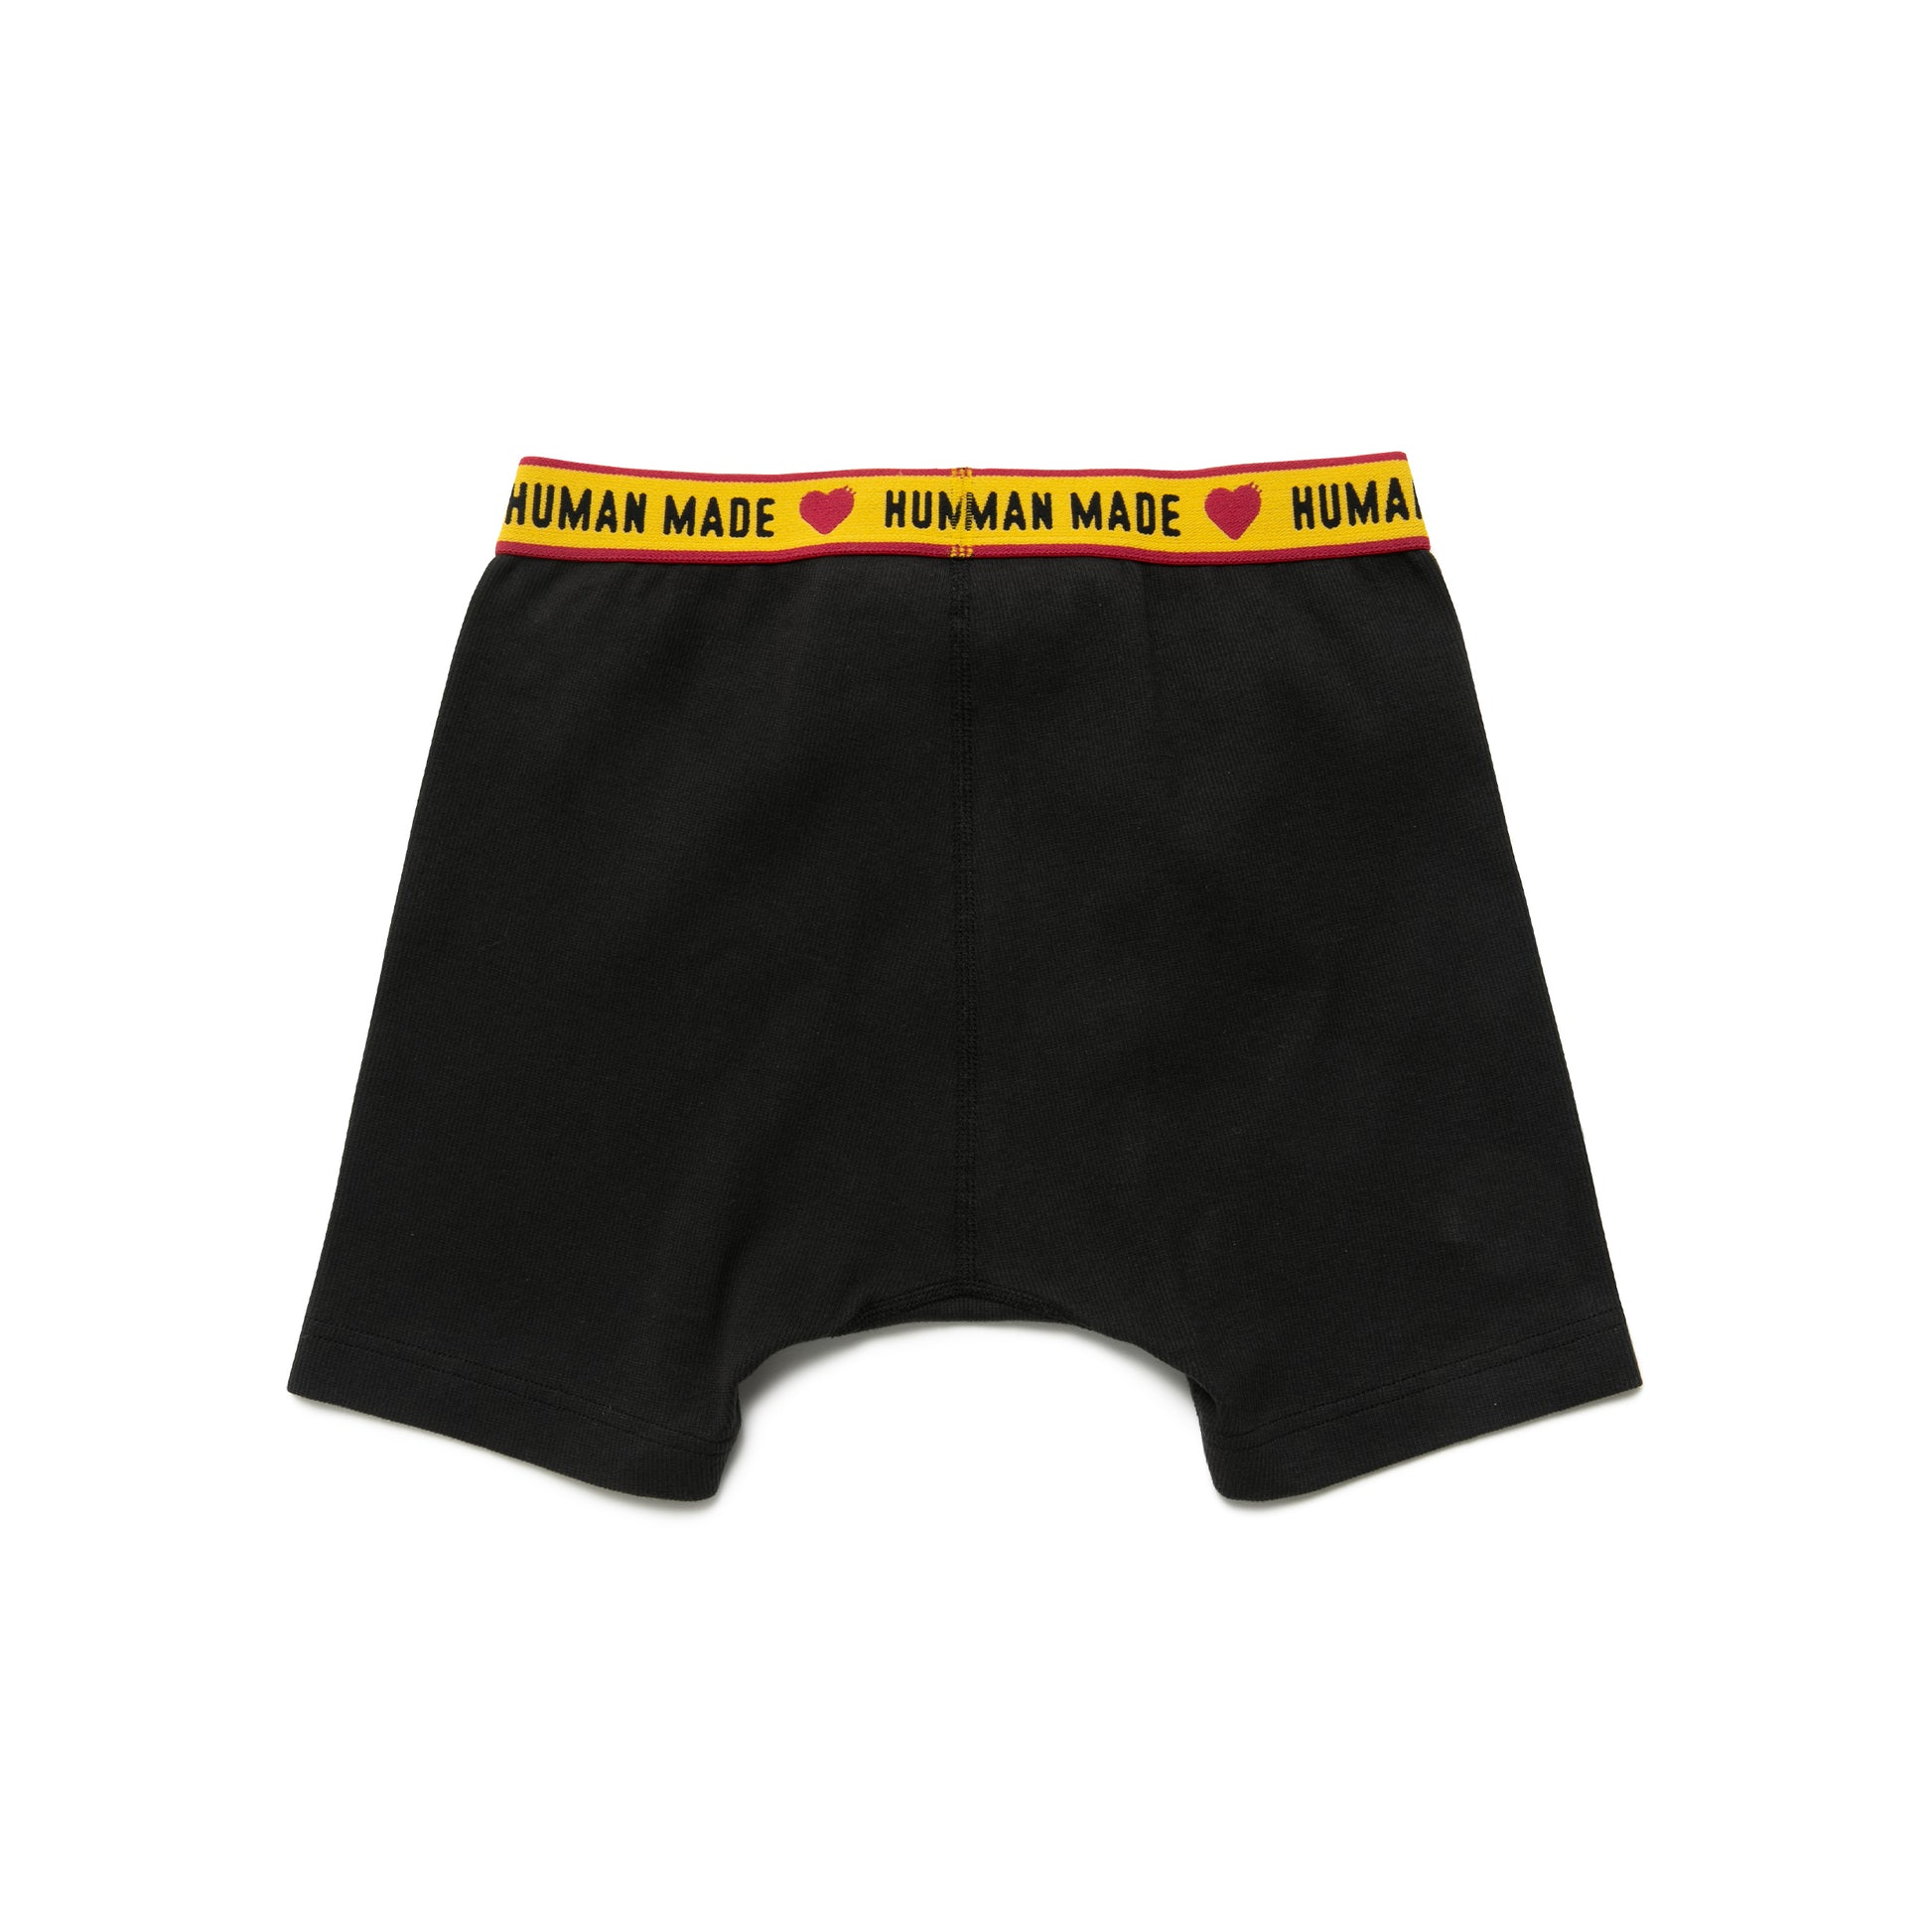 HM BOXER BRIEF – HUMAN MADE ONLINE STORE